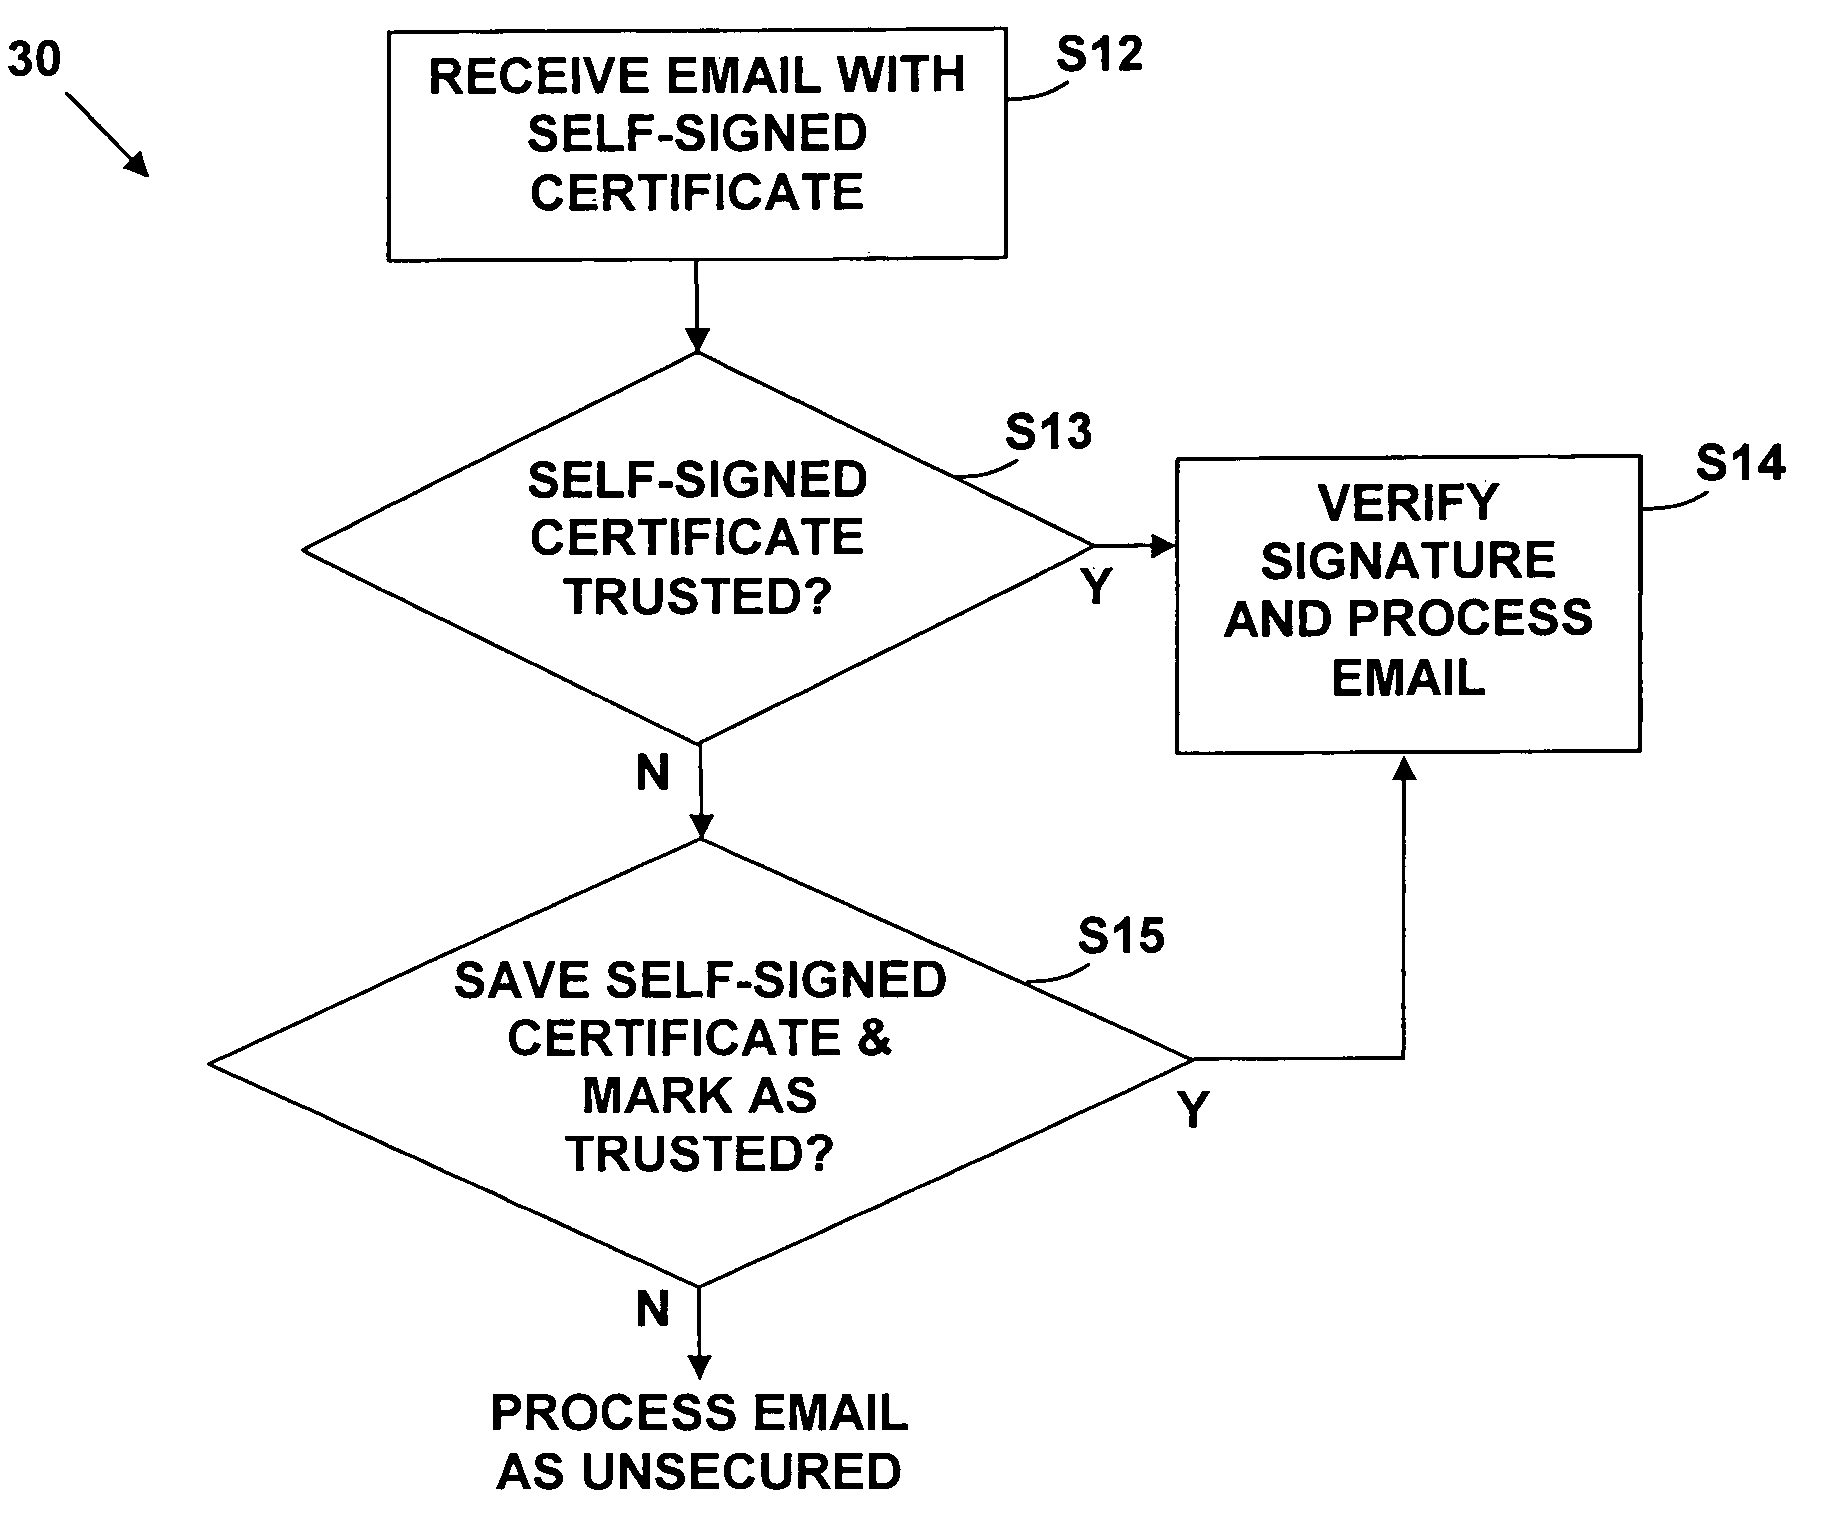 Transparent on-demand certificate provisioning for secure email